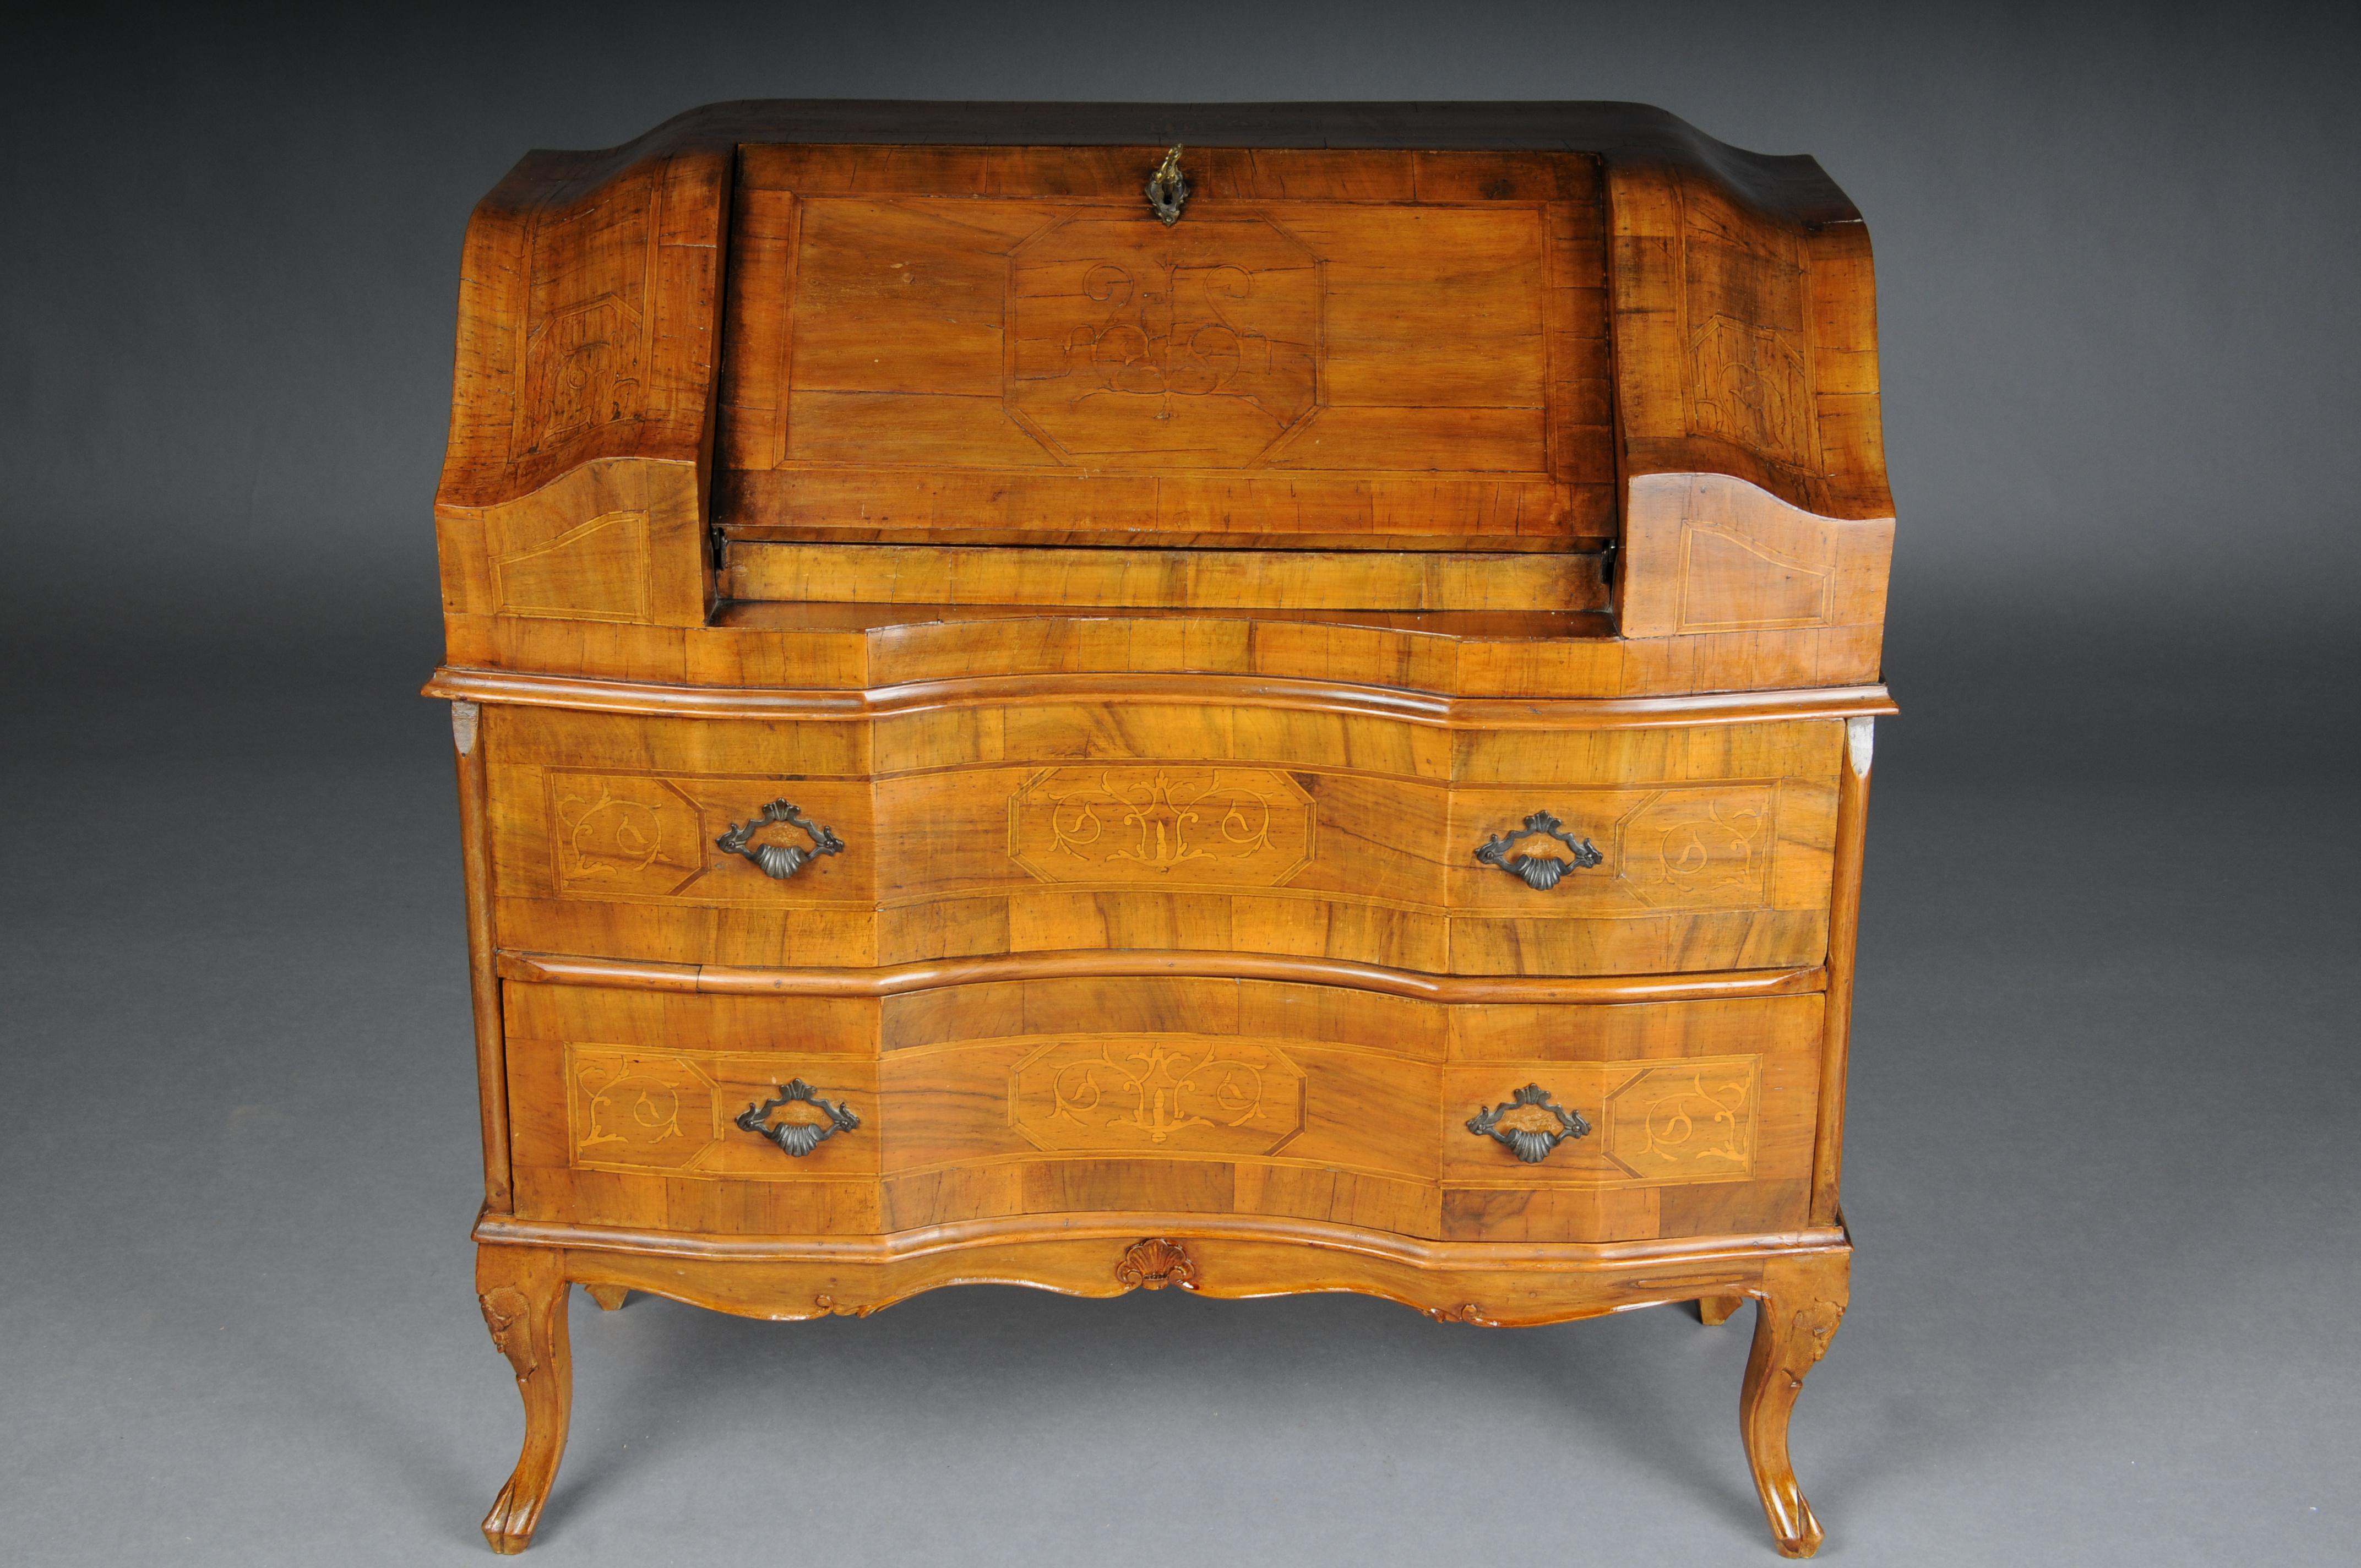 Beautiful antique slanted flap secretary, 20th century. Walnut root veneer.

Solid wood with walnut root veneer and inlays. Slanted flap secretary made of solid wood, baroque. Multi-curved body standing on high curved legs. 2 two-drawer fronts with